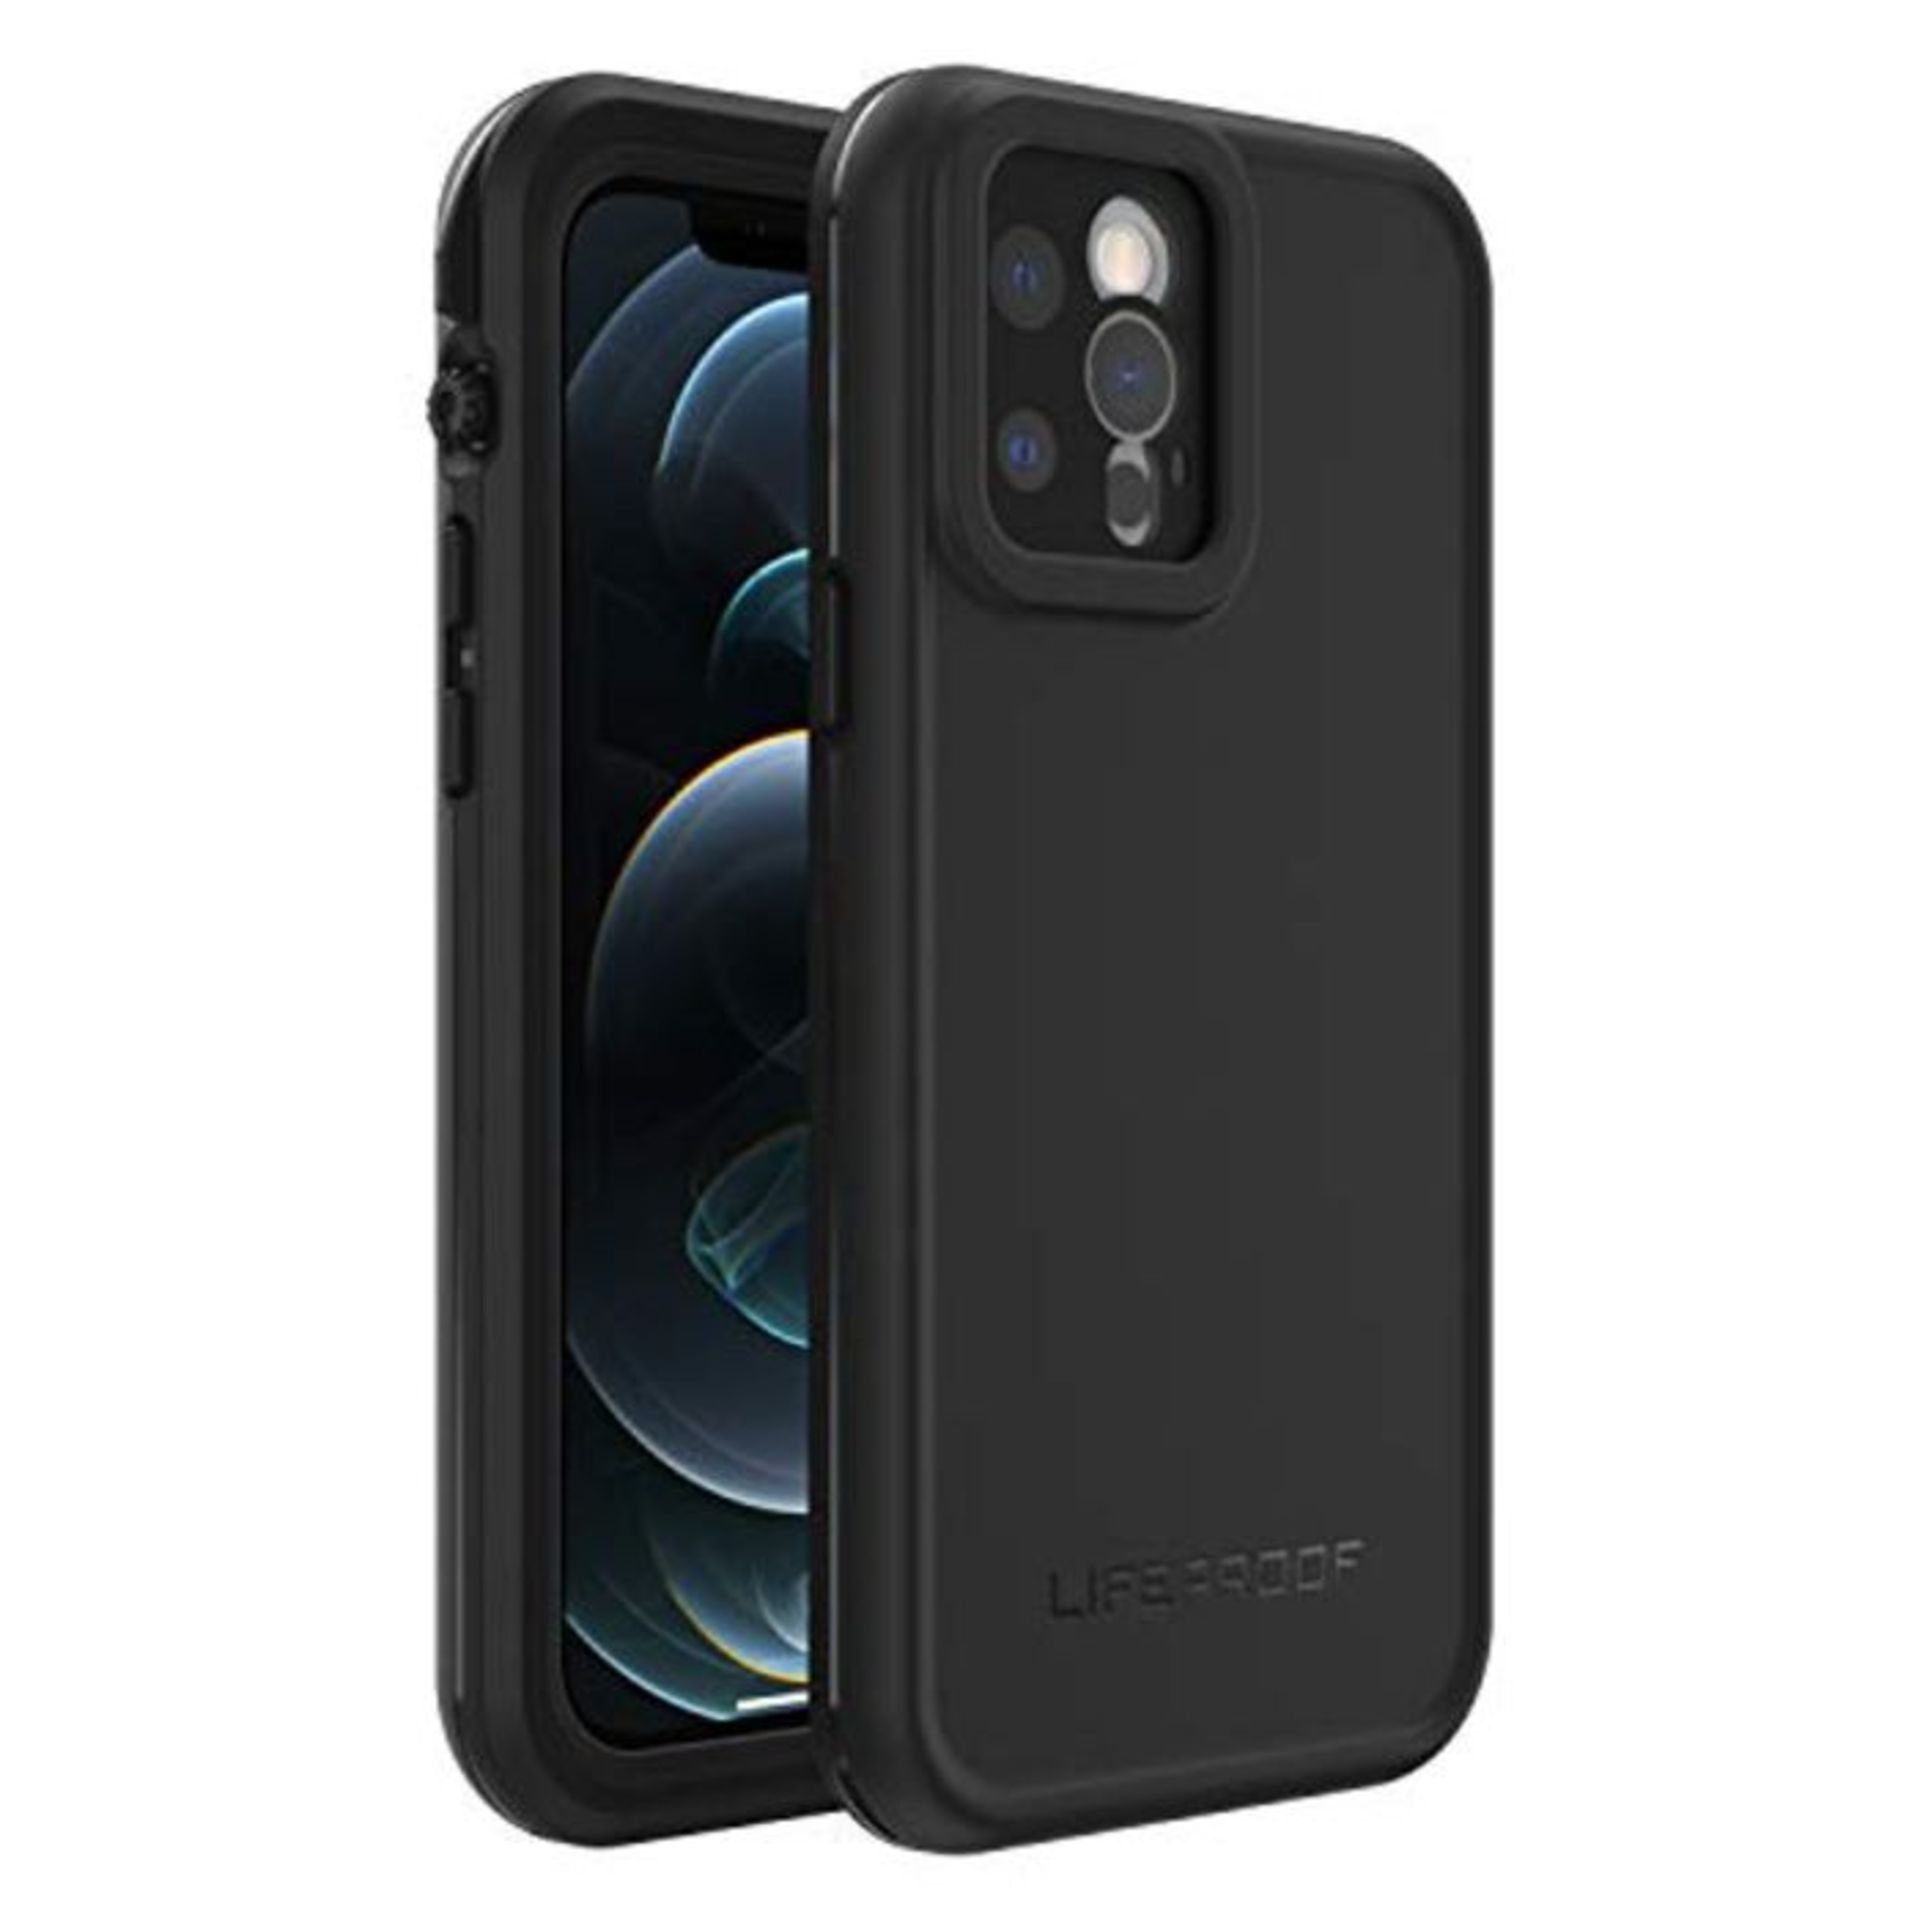 RRP £69.00 LifeProof for iPhone 12 Pro, Waterproof Drop Protective Case, Fre Series, Black